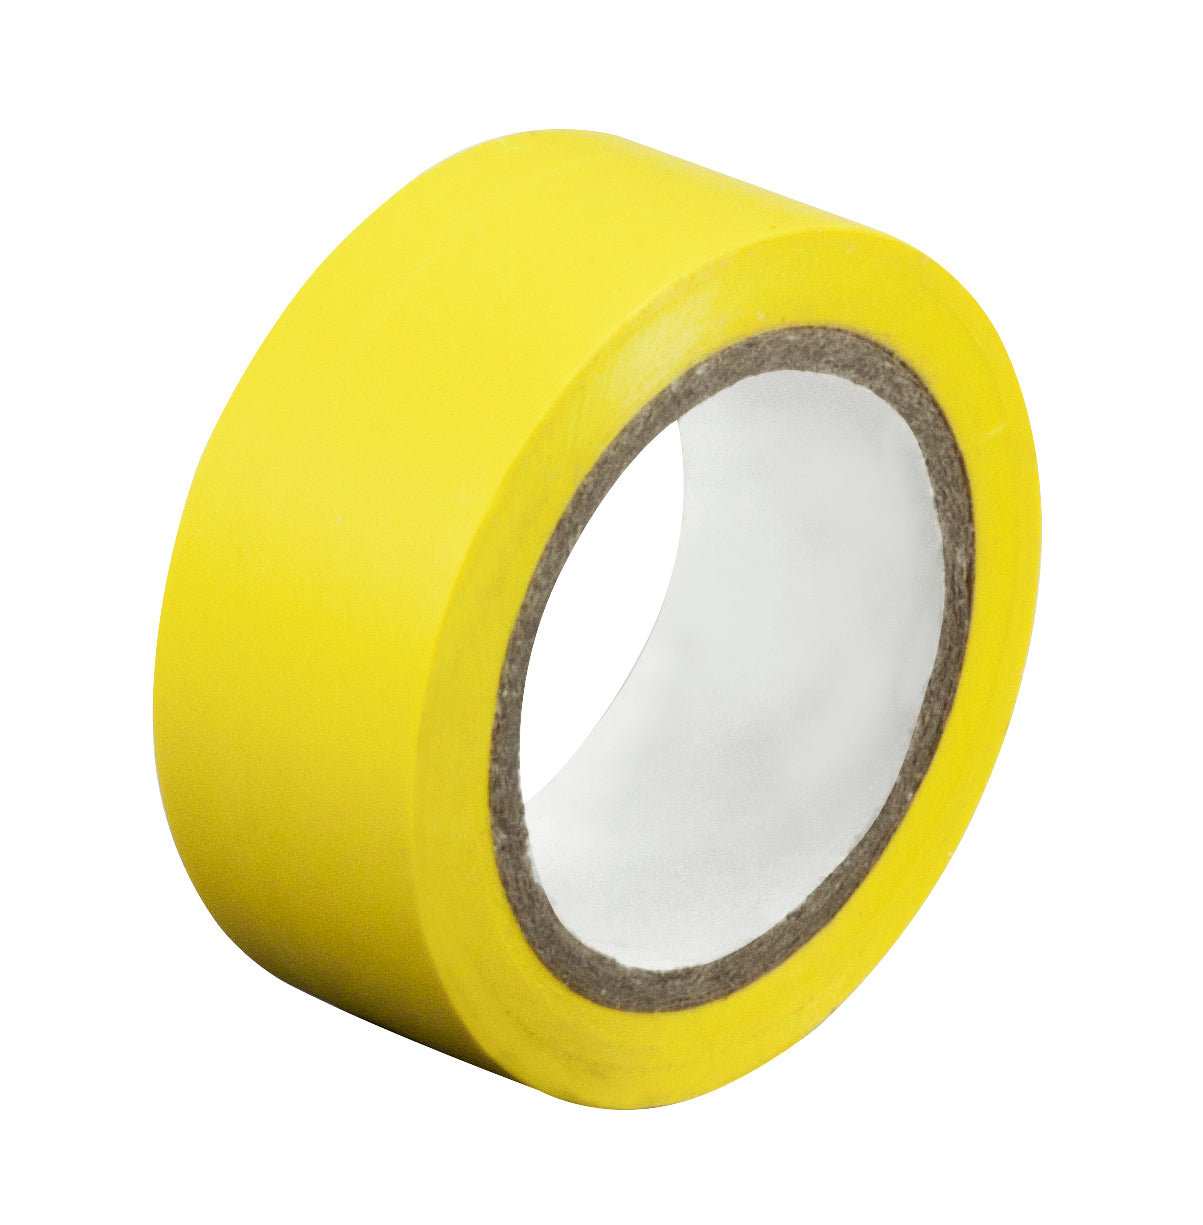 PVC Tape Size: 19mmx5m Roll - Yellow - Pack of 10